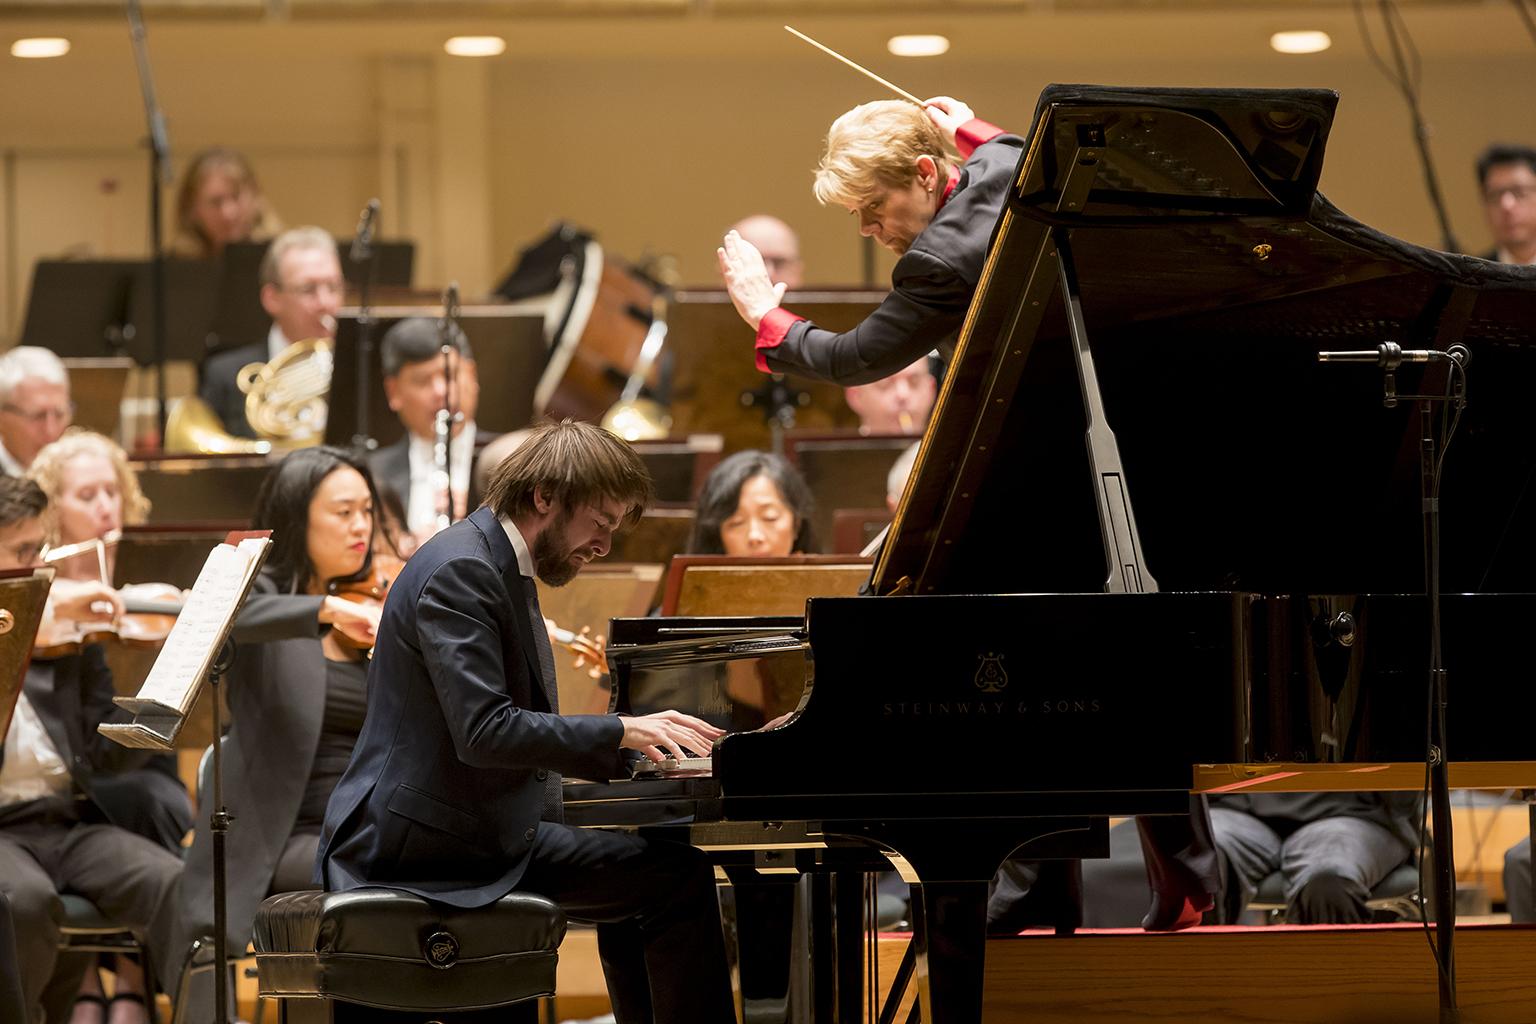 Daniil Trifonov is soloist in Prokofiev’s Piano Concerto No. 3 with guest conductor Marin Alsop and the CSO. (© Todd Rosenberg)